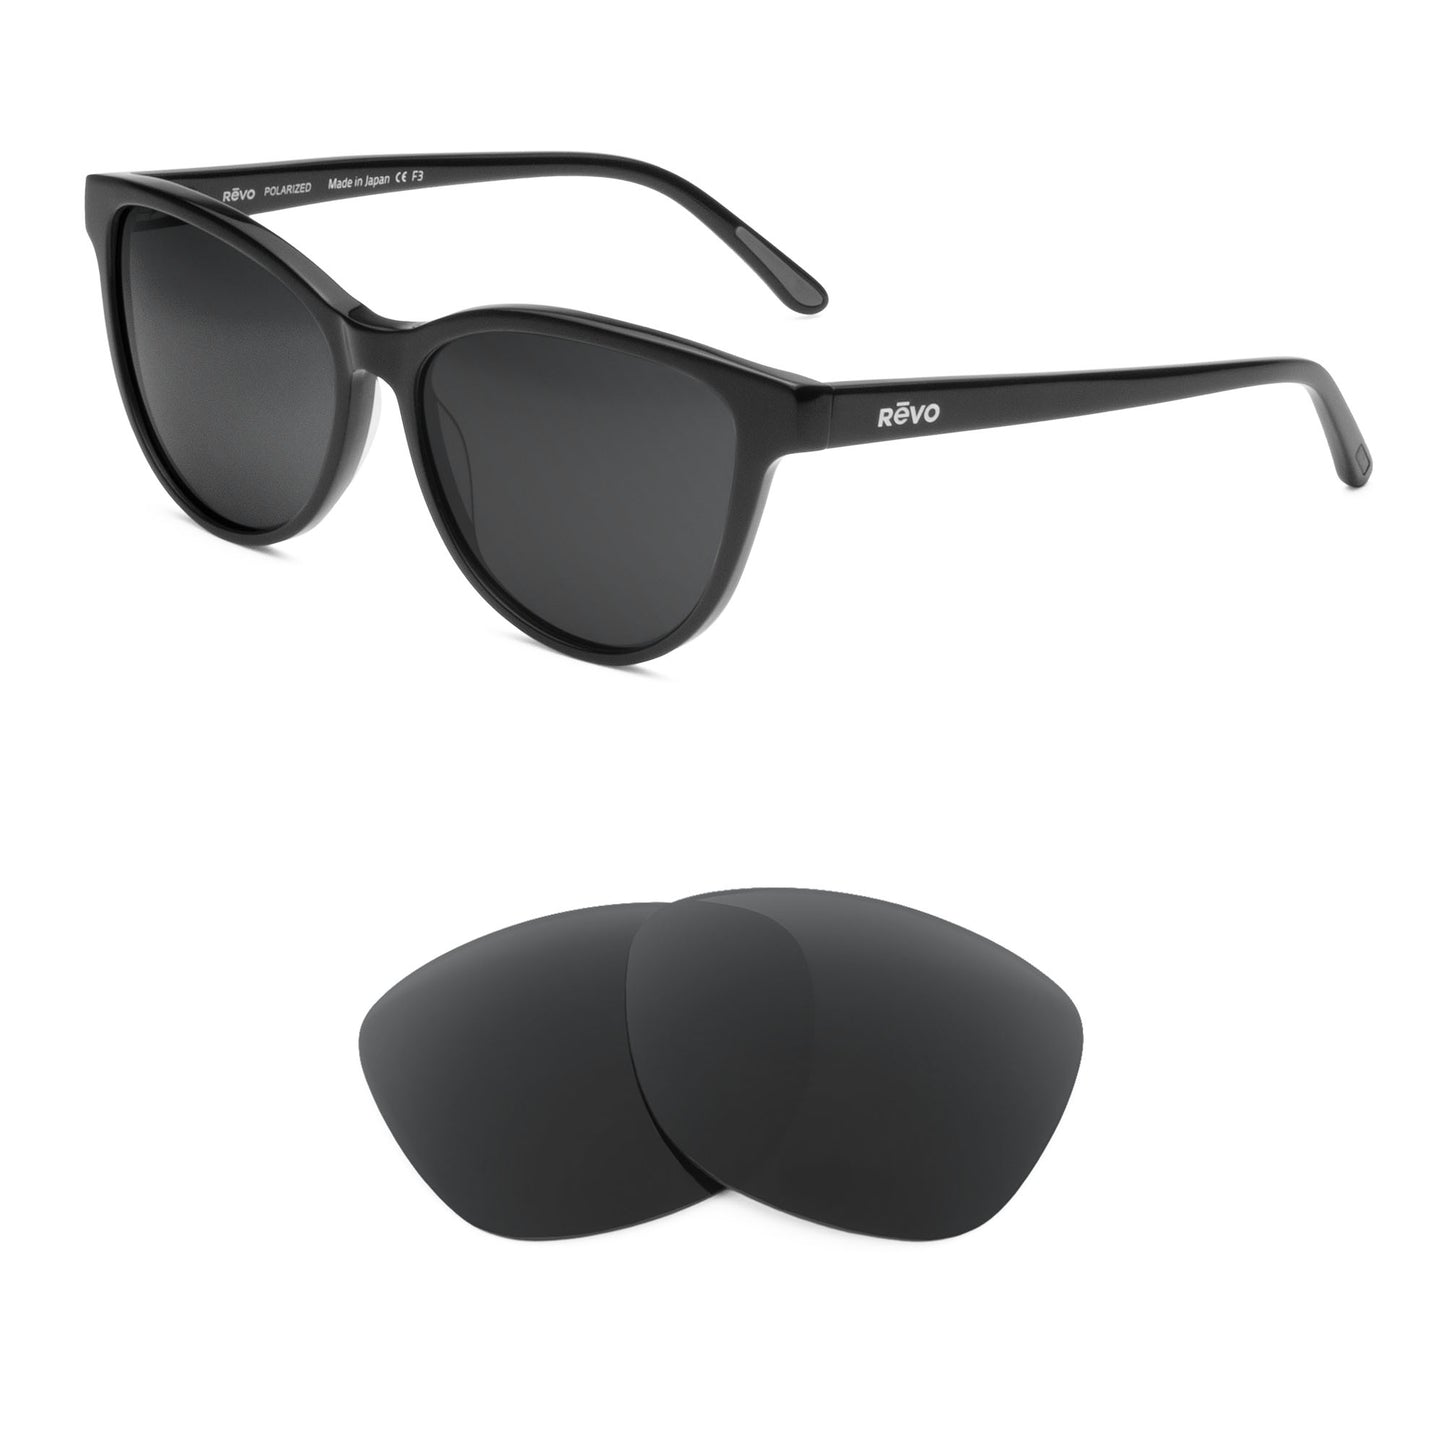 Revo Daphne sunglasses with replacement lenses